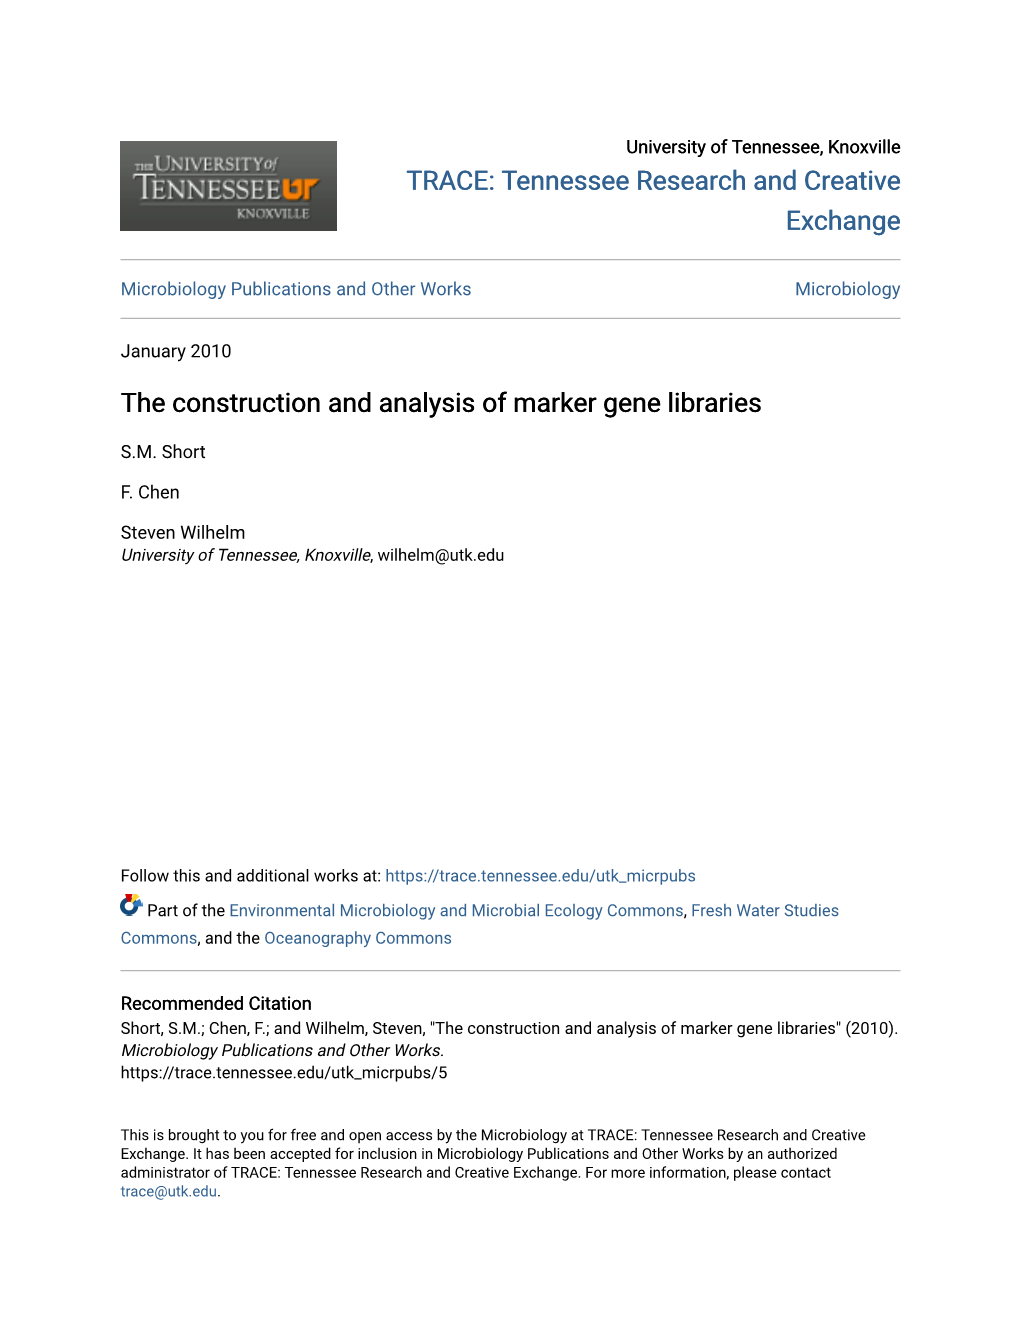 The Construction and Analysis of Marker Gene Libraries